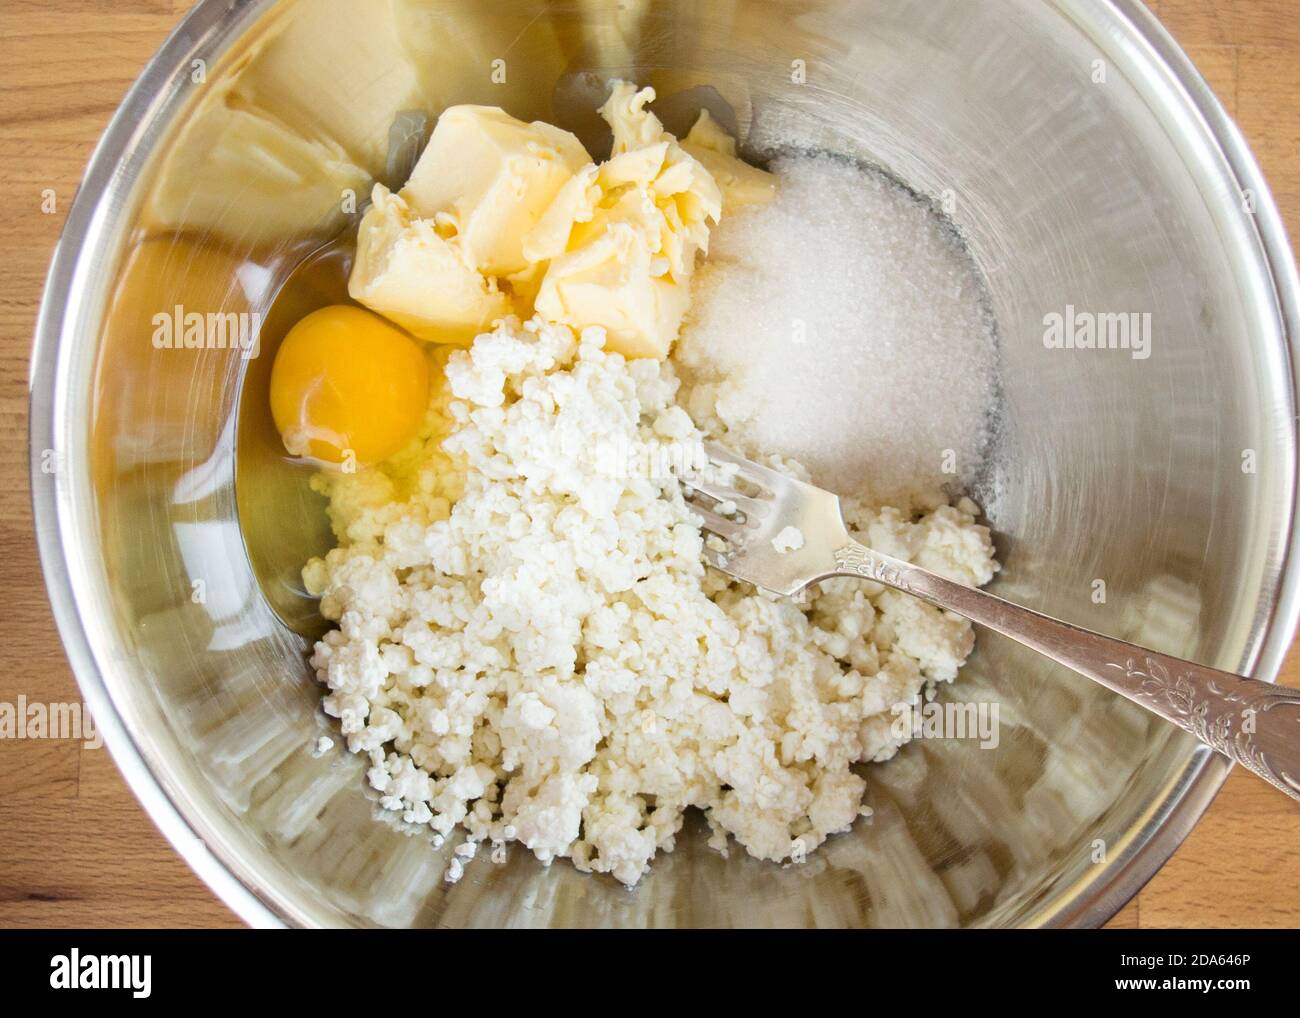 Raw ingredients in a bowl of curd biscuits. Top view, no people. Stock Photo